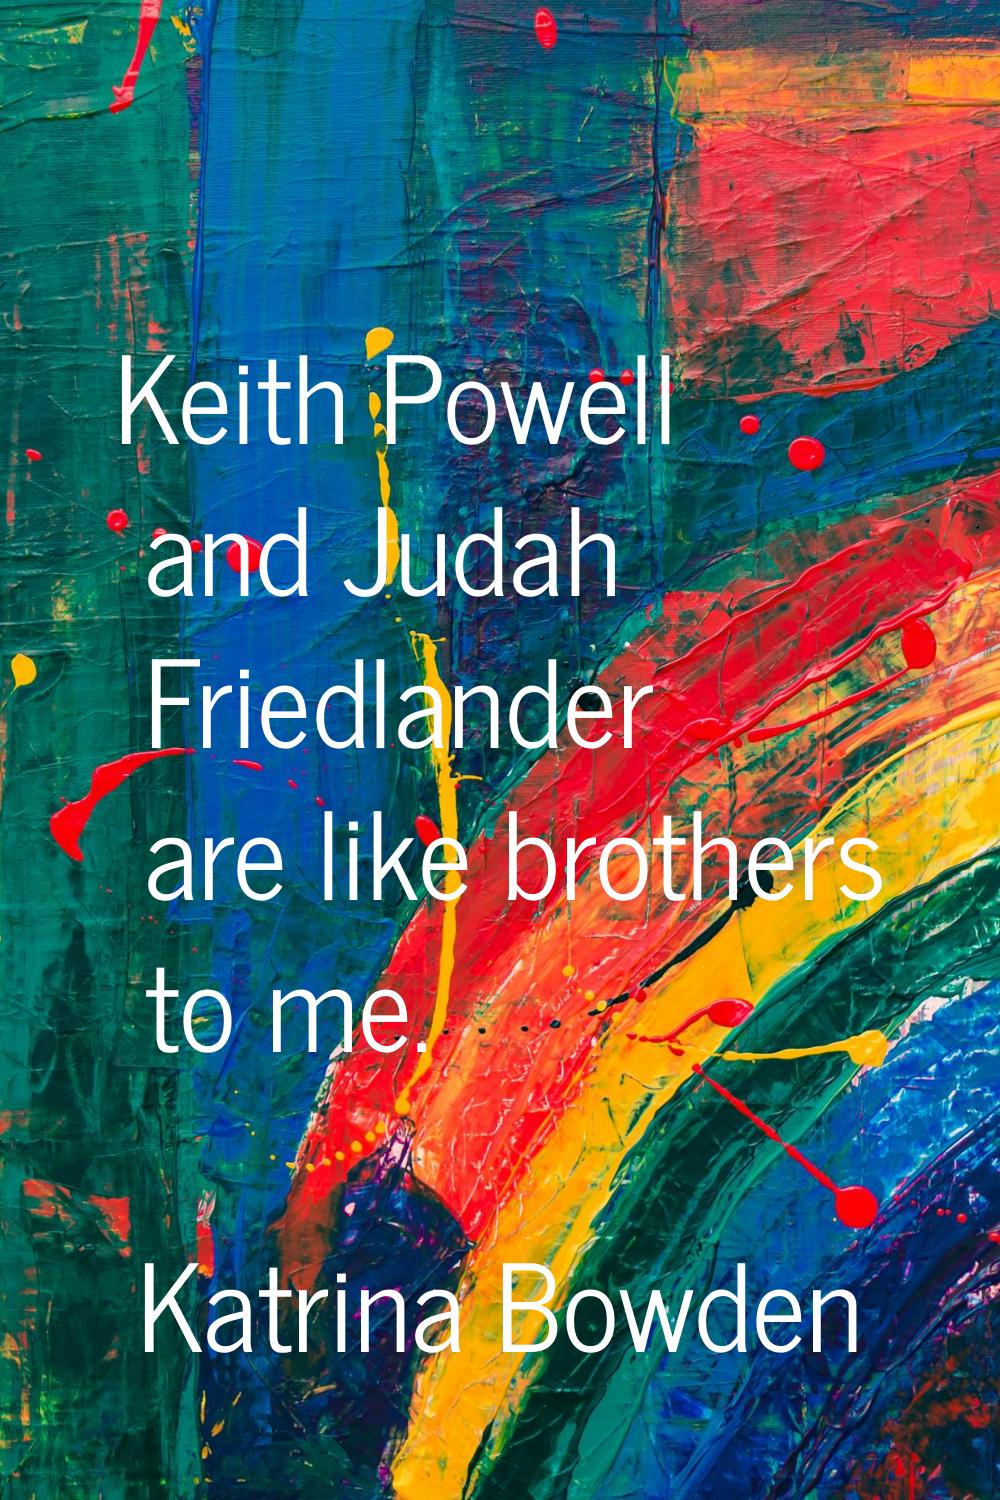 Keith Powell and Judah Friedlander are like brothers to me.